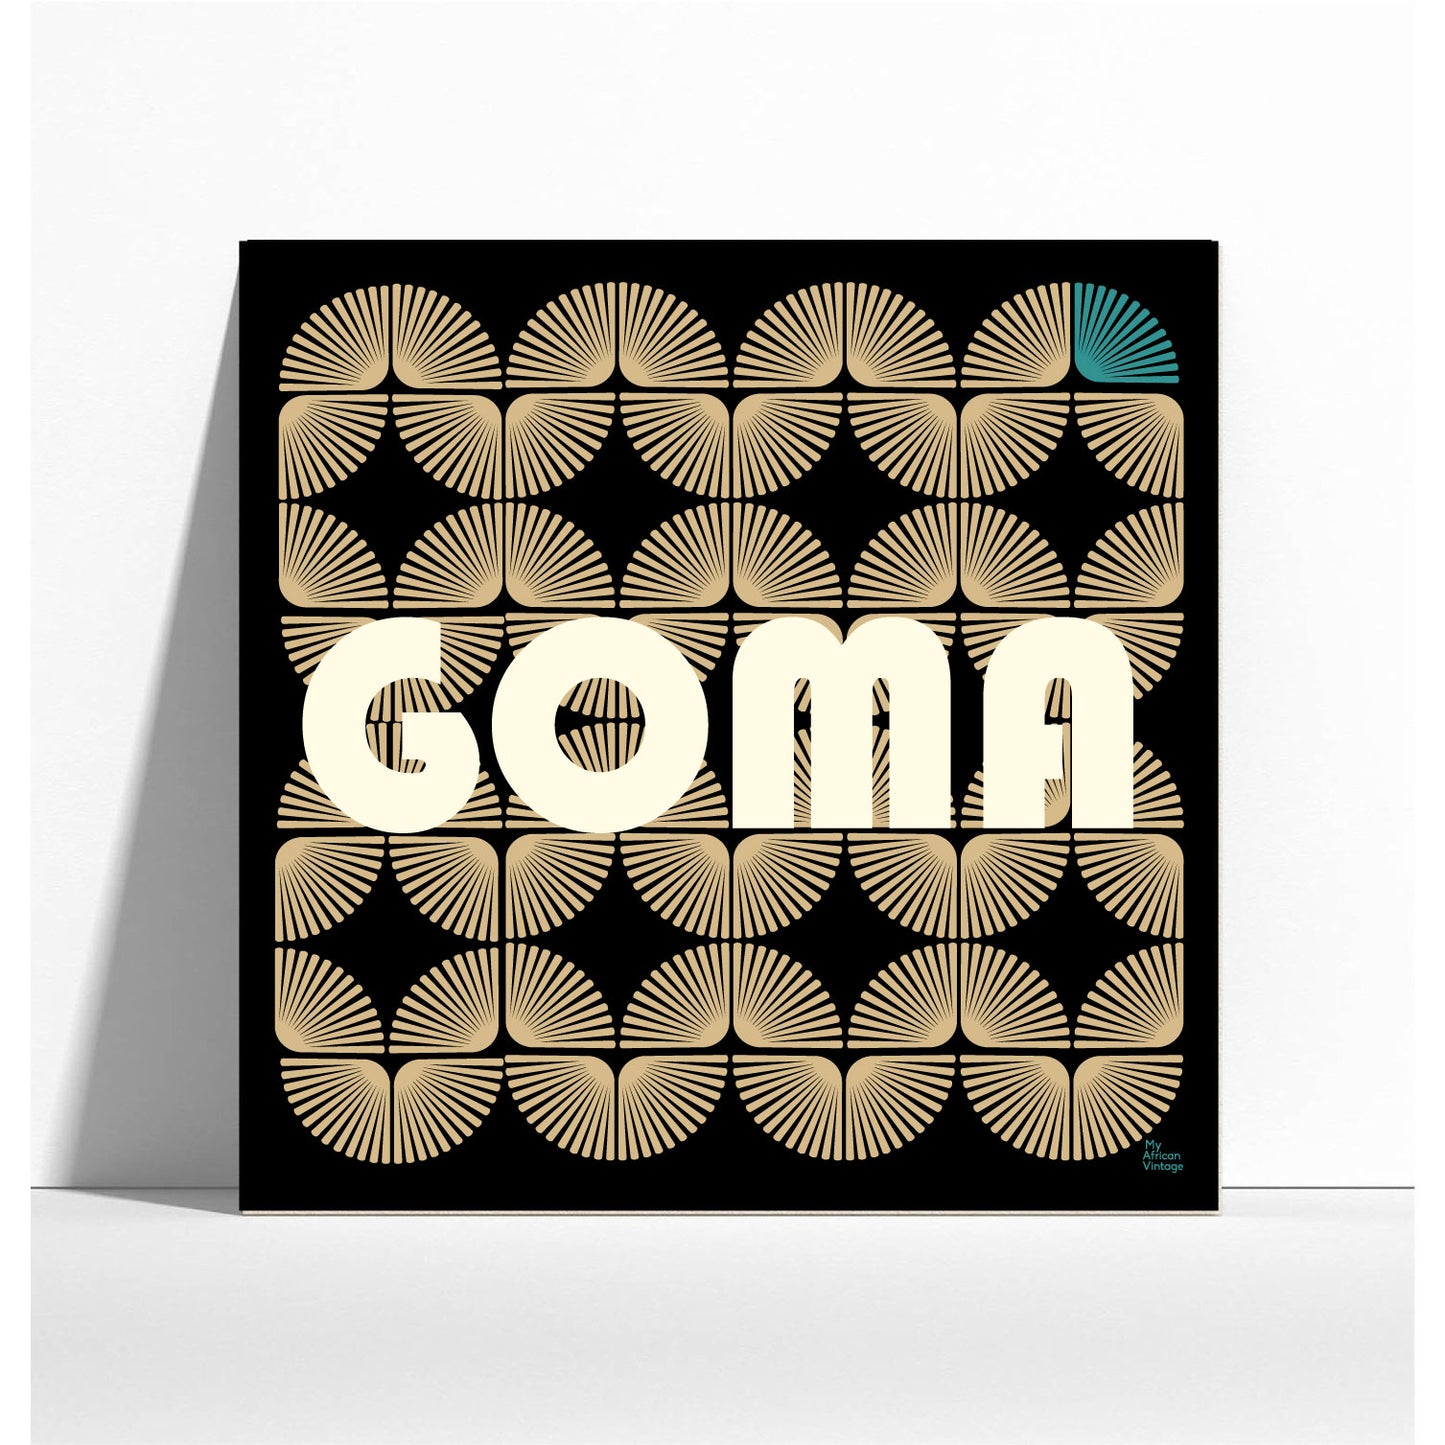 "Goma" retro style poster - "My African Vintage" collection